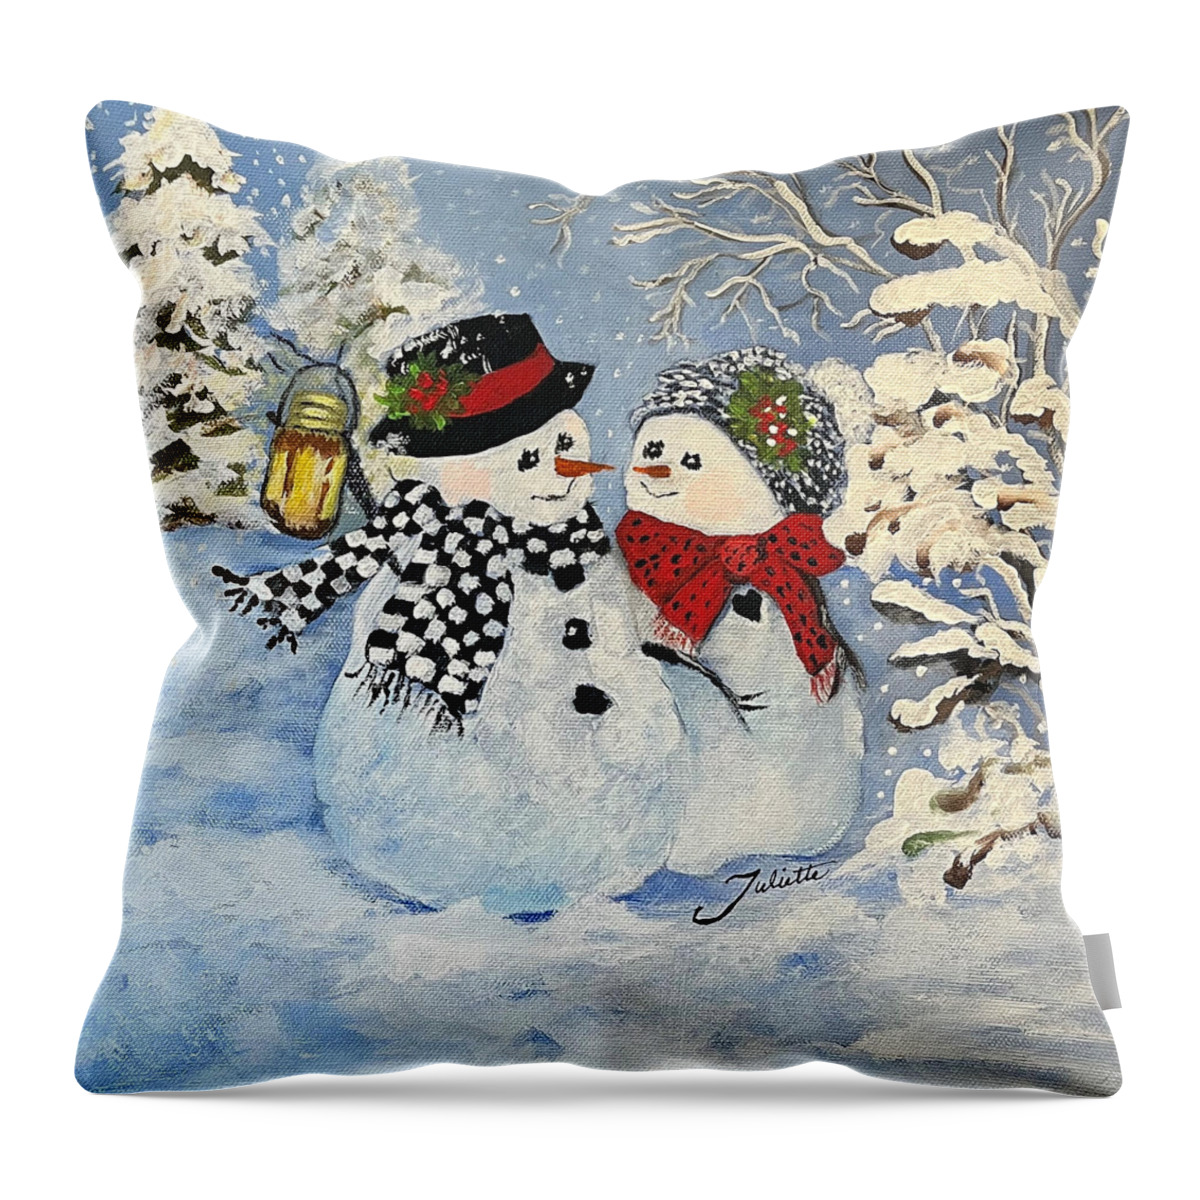 Snowman Throw Pillow featuring the painting This is a Fine Snowmance by Juliette Becker